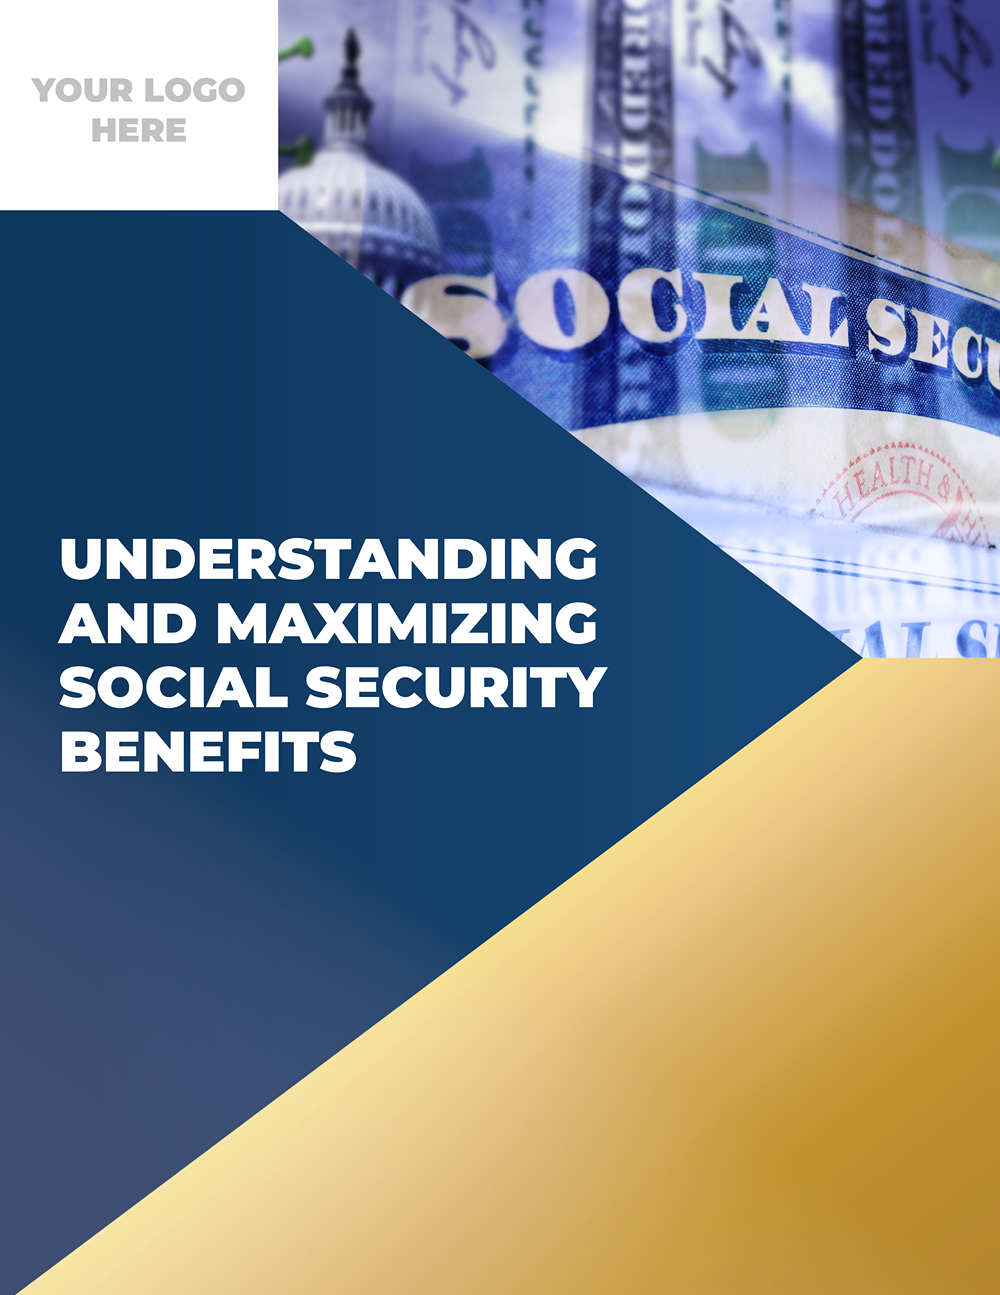 Understanding and Maximizing Your Social Security Benefits